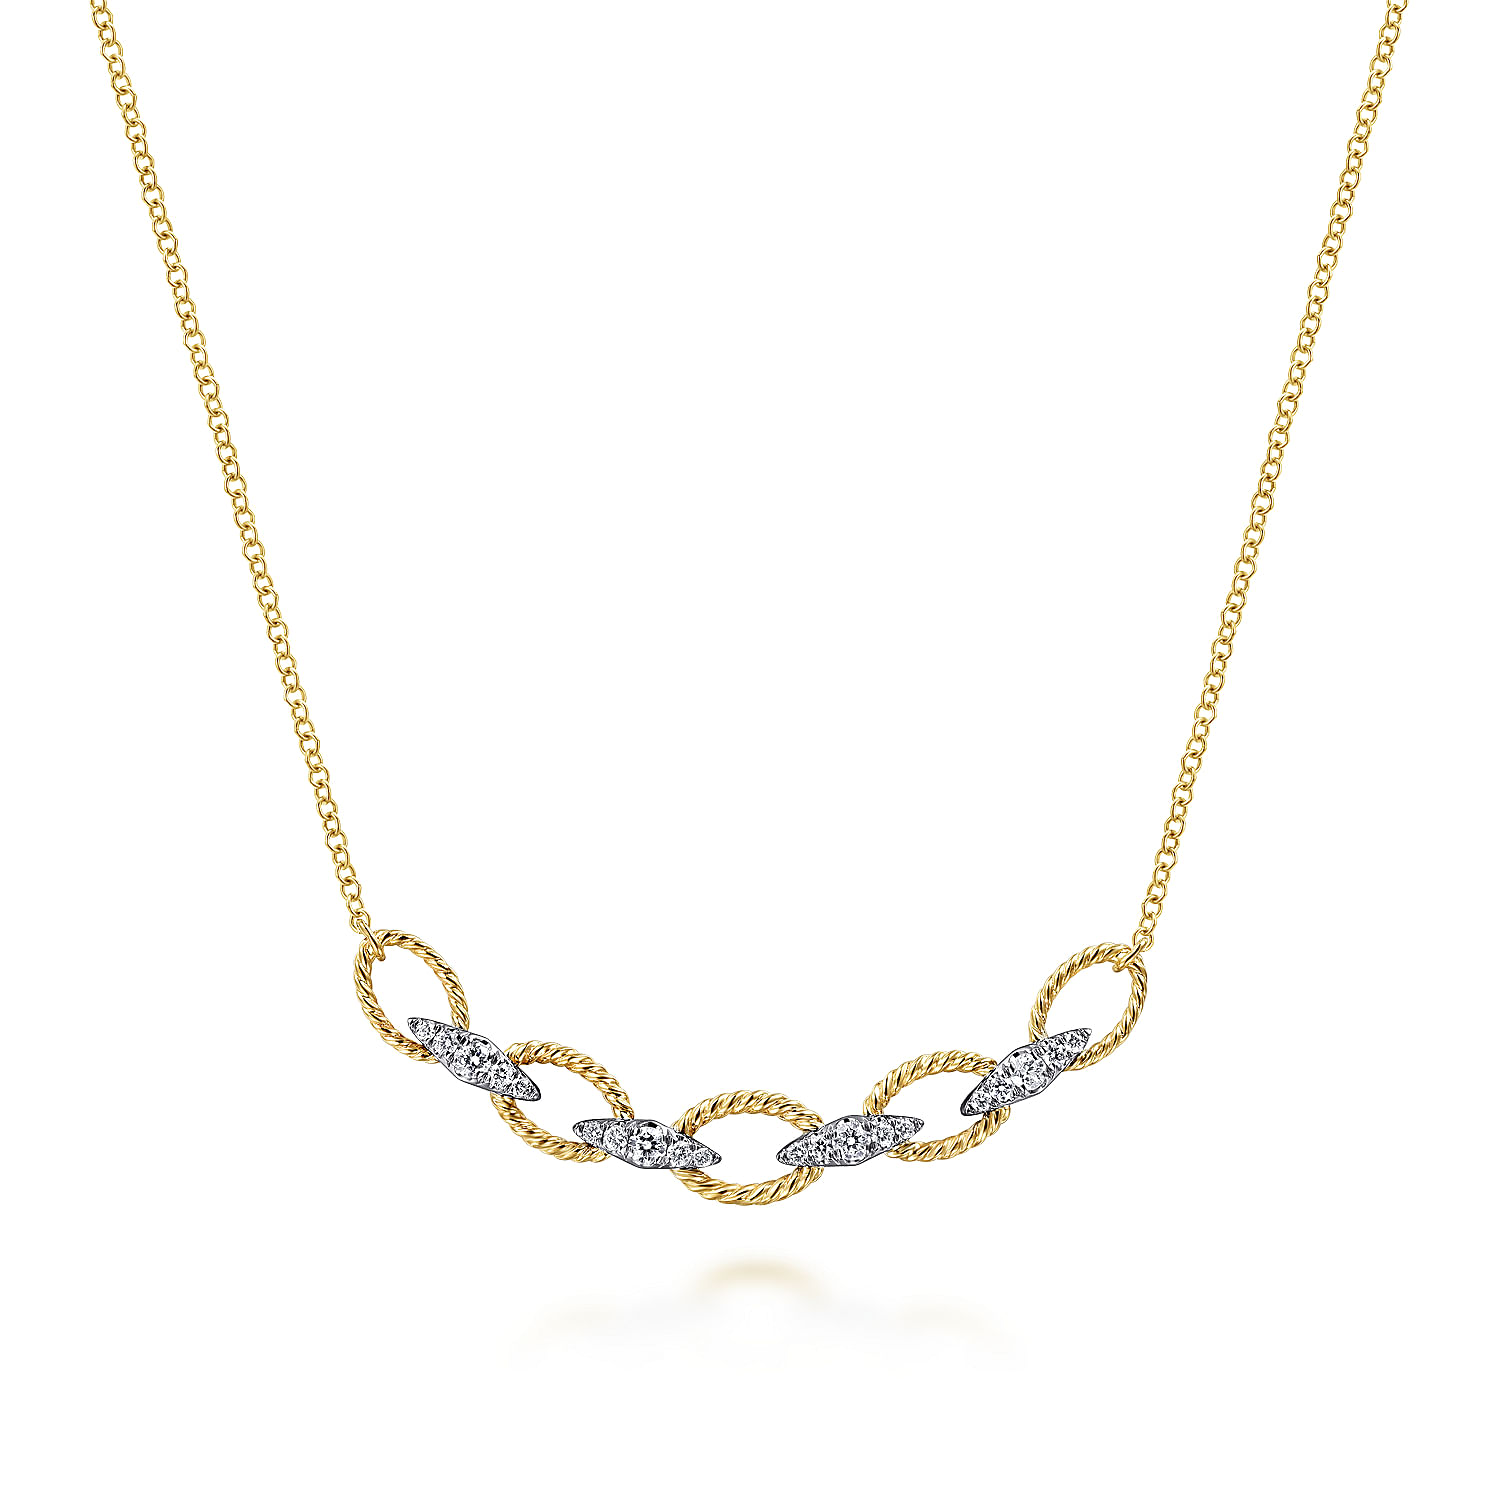 Gabriel - 14K Yellow-White Gold Twisted Rope Oval Link Necklace with Diamond Connectors